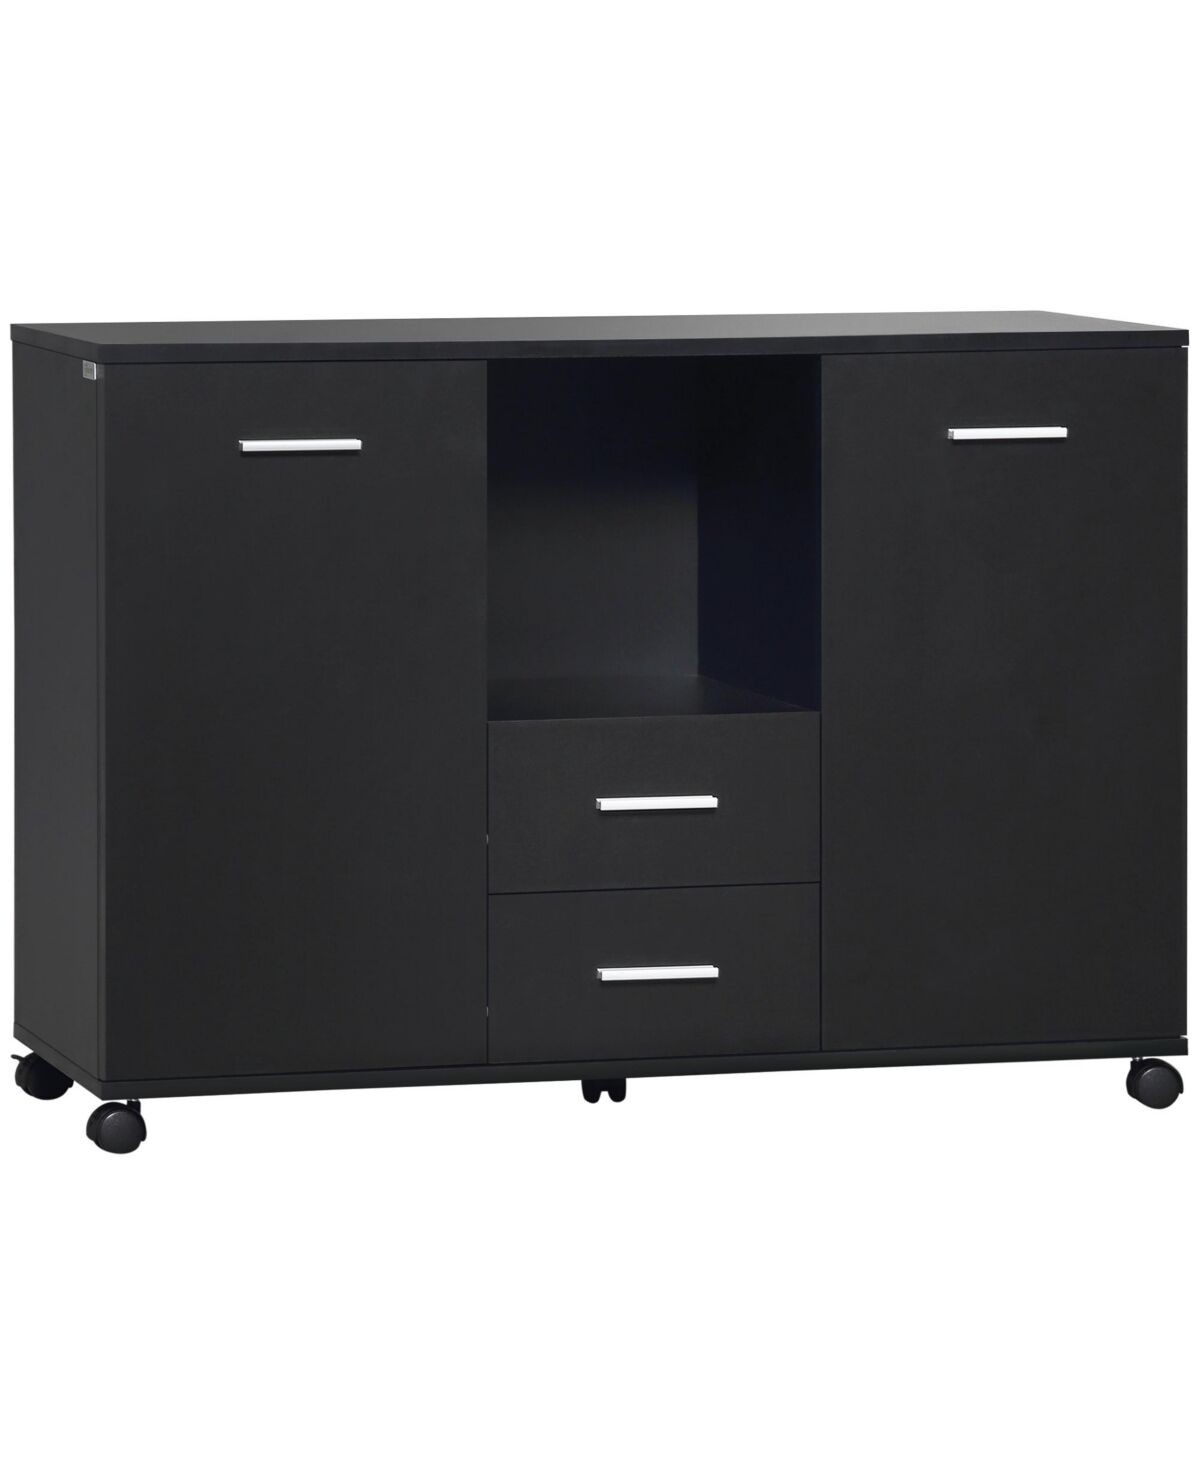 Vinsetto Office/Home File & Scanner Storage Cabinet w/ 2 Cabinets, Black - Black